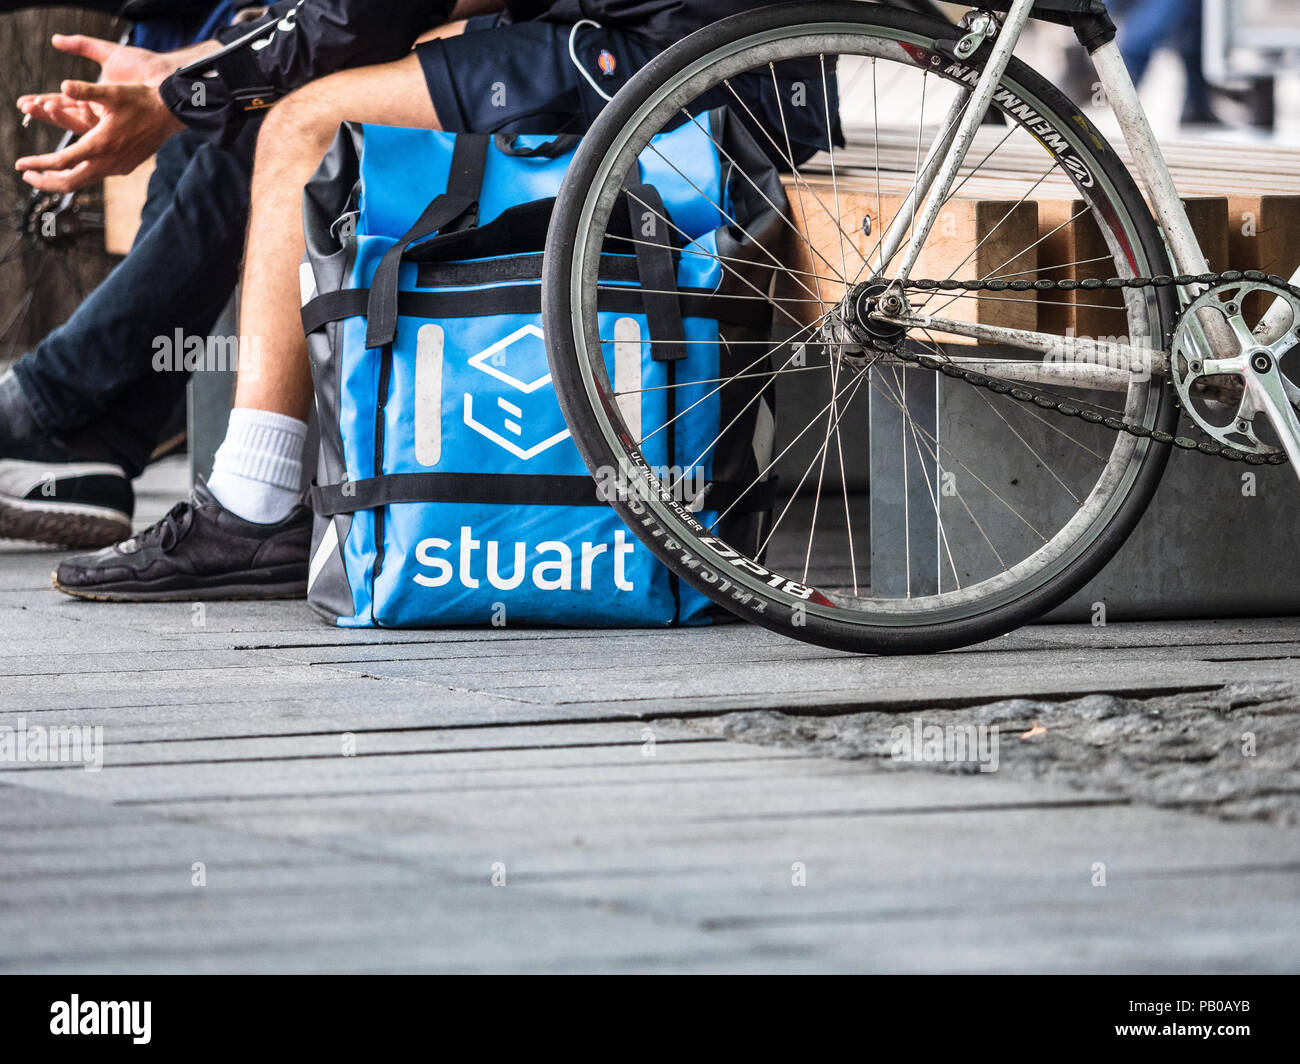 Stuart Delivery Couriers take a break between client deliveries. The company was founded in 2015 and operates in 15 cities. Stock Photo